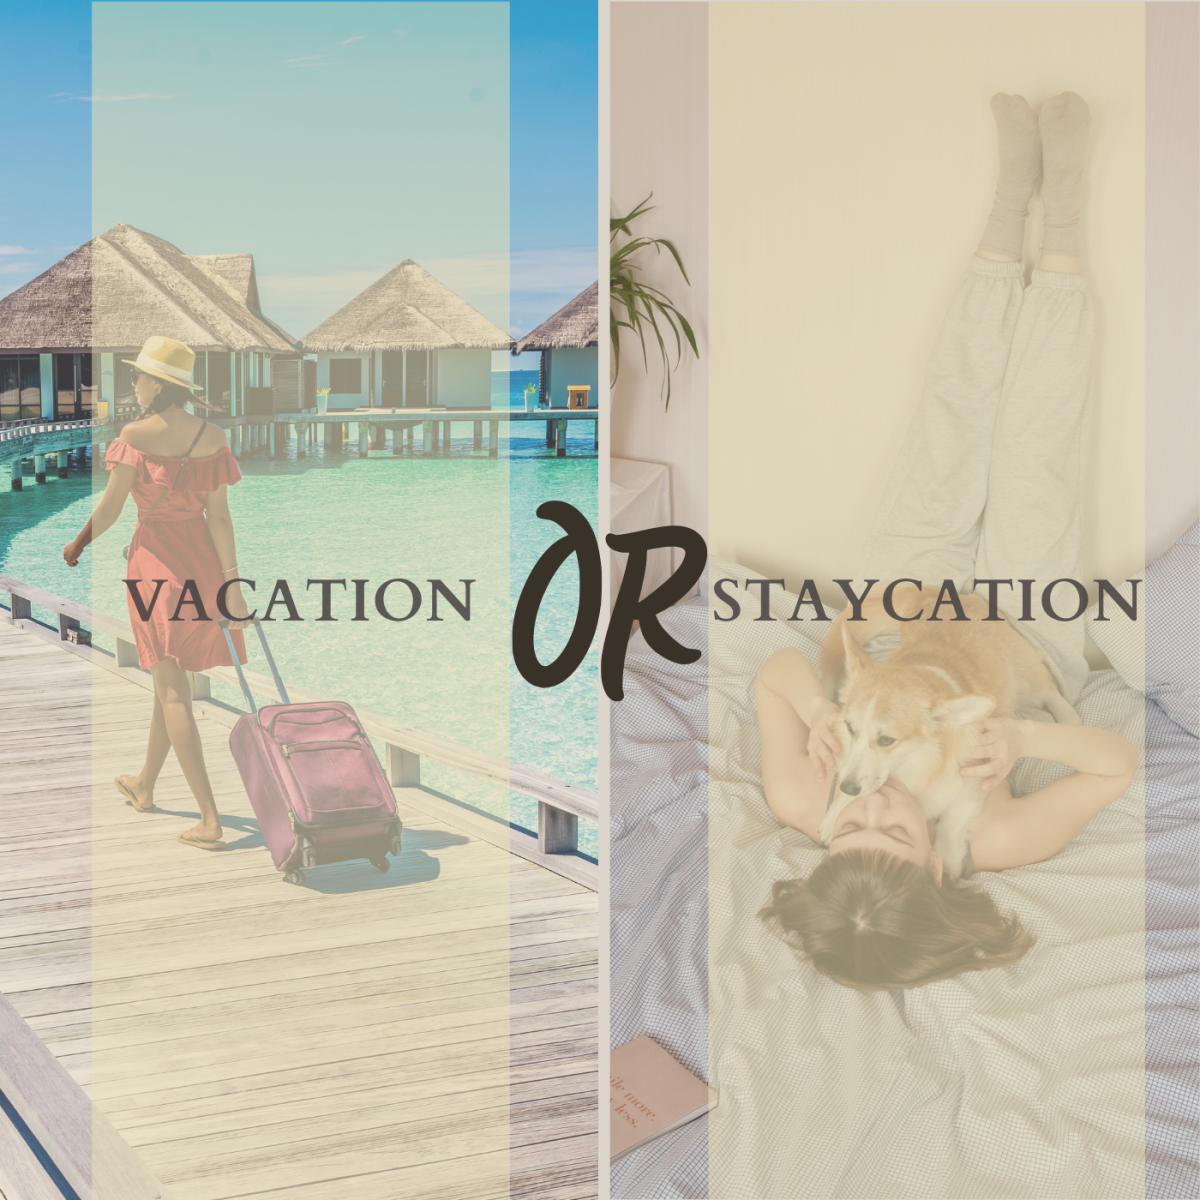 Vacation or staycation?